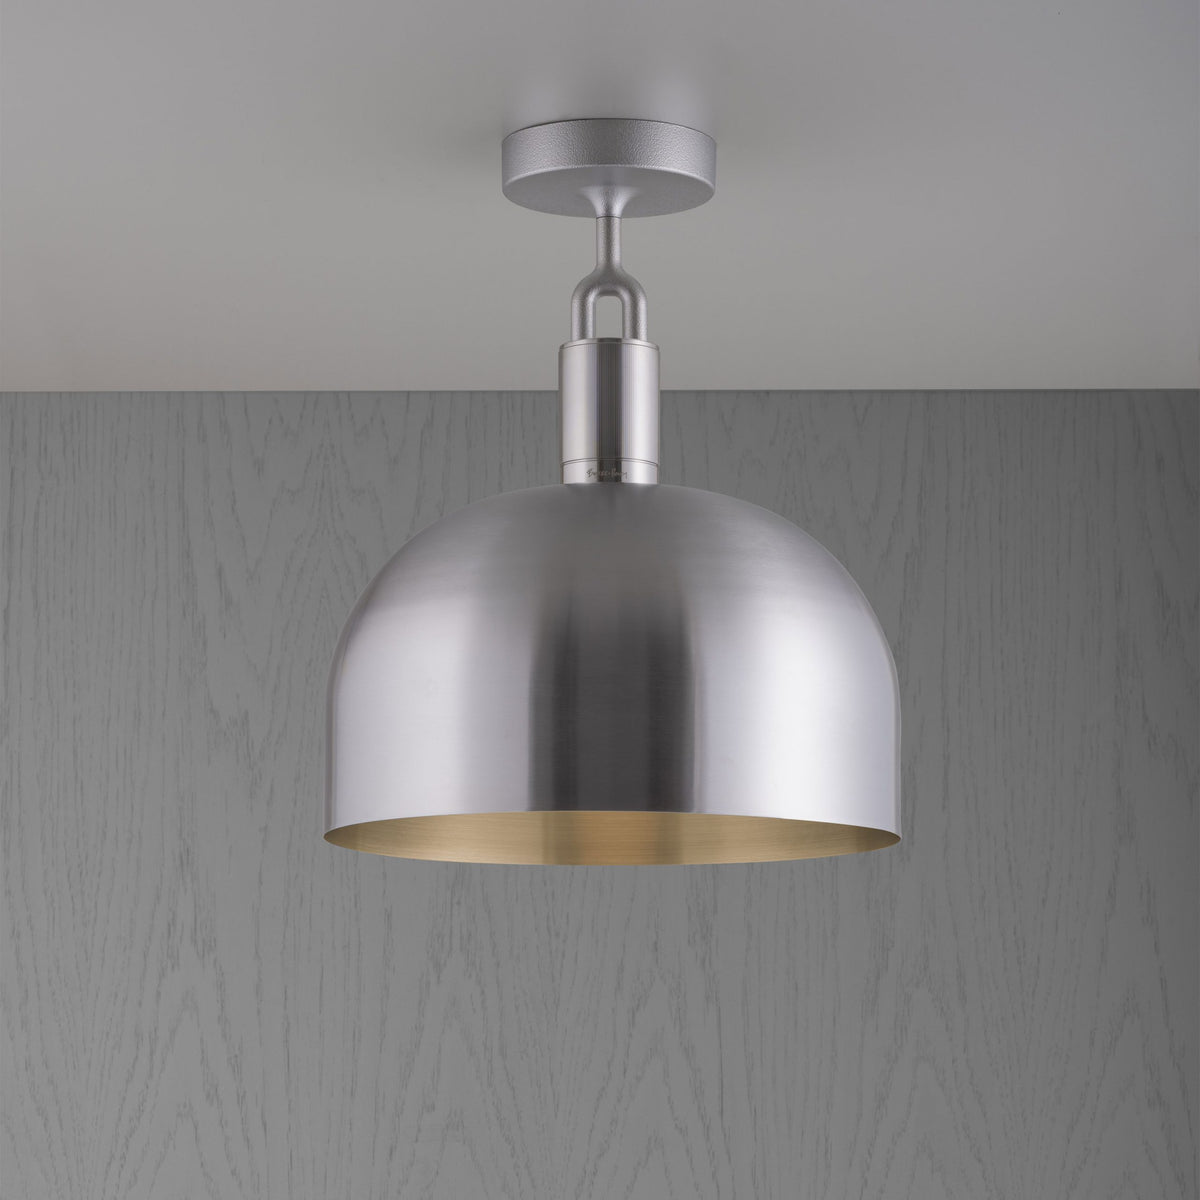 Buster + Punch - NFC-853214 - Forked Ceiling - Shade - Forked - Steel